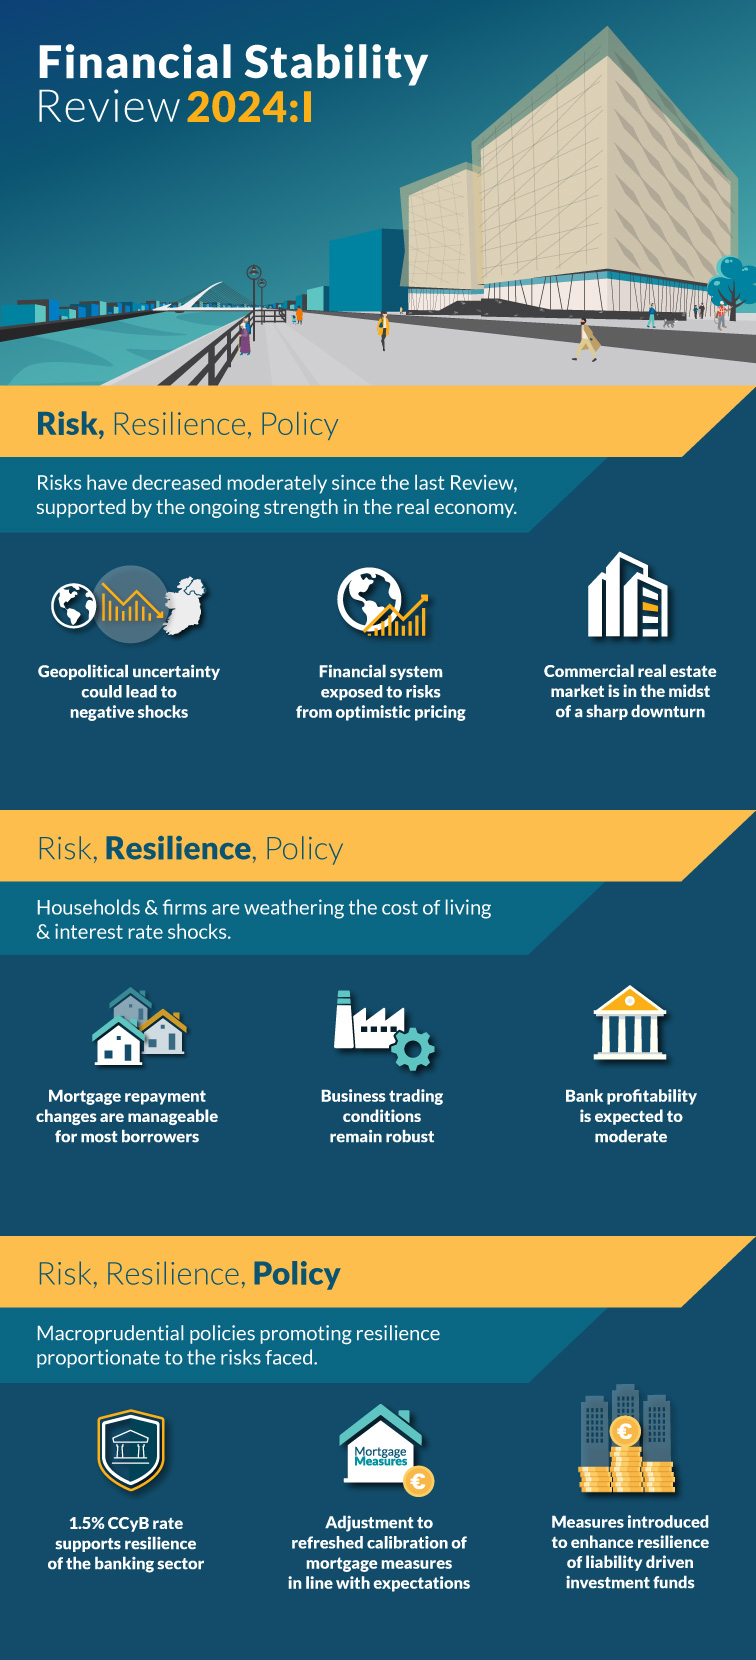 Risk, Resilience, Policy